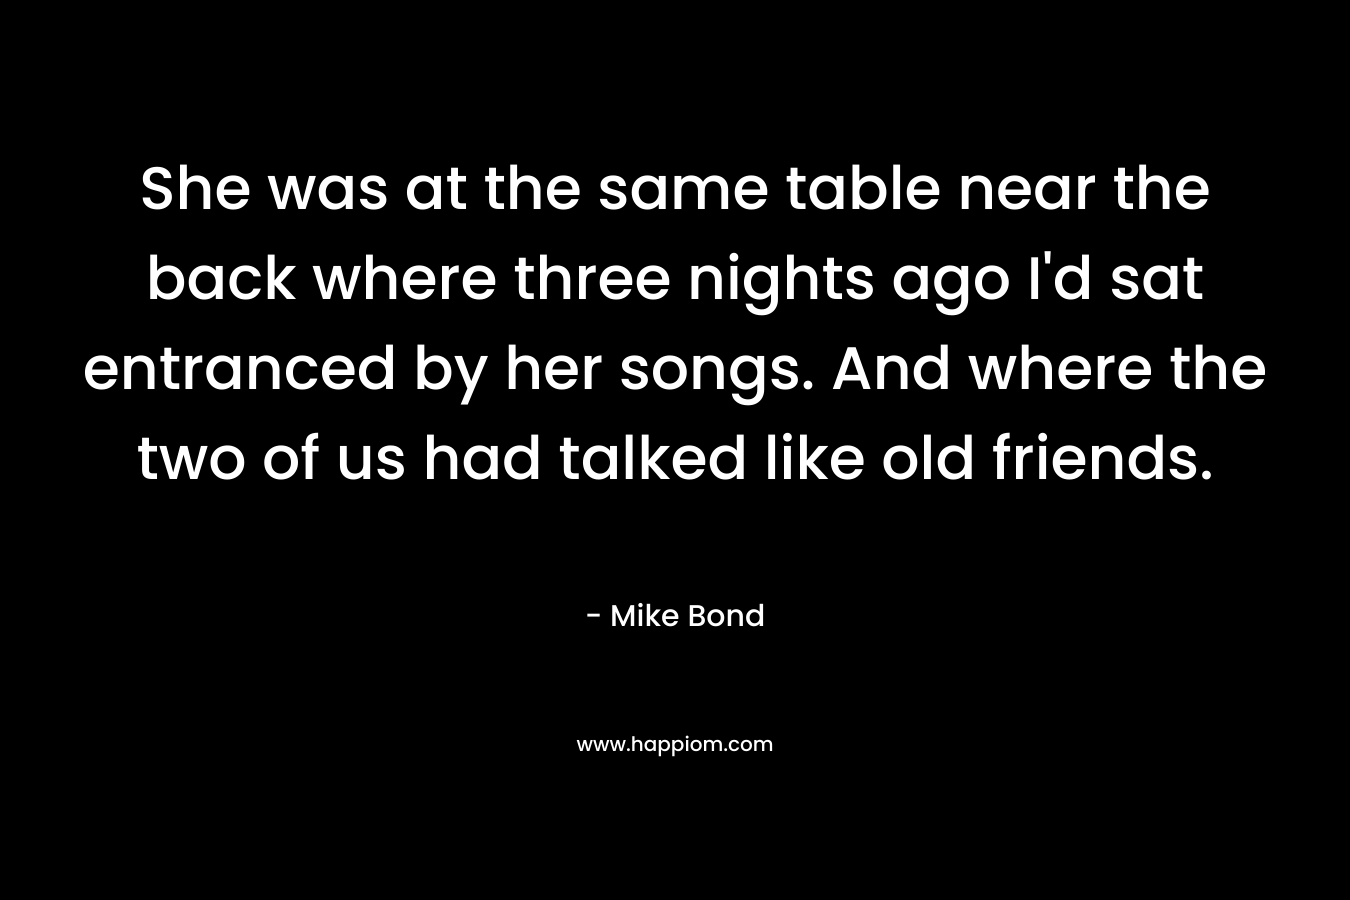 She was at the same table near the back where three nights ago I’d sat entranced by her songs. And where the two of us had talked like old friends. – Mike Bond